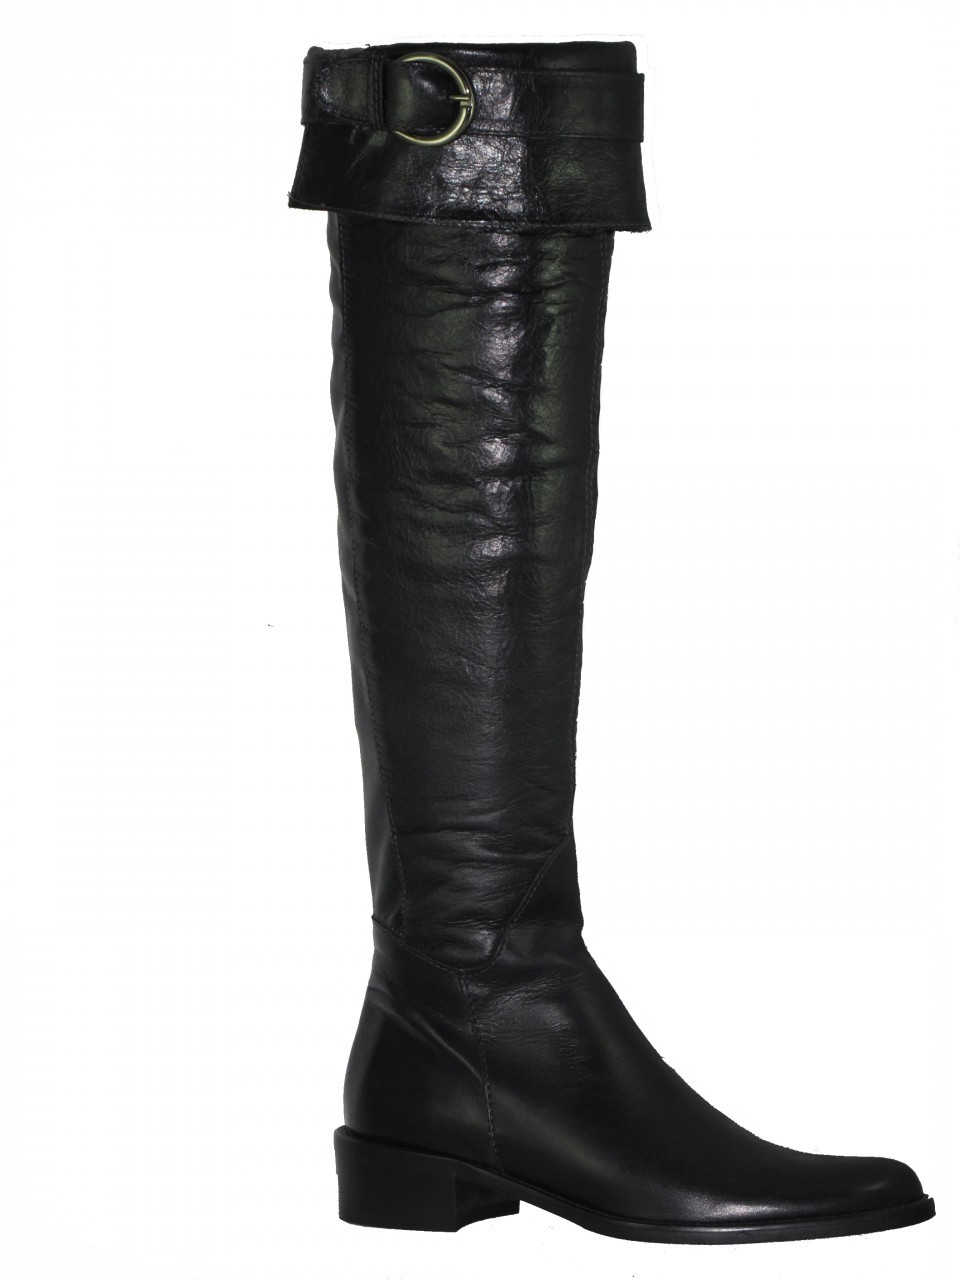 Lamica Women's Knee High/over the knee Italian Boot I Ride Available Black